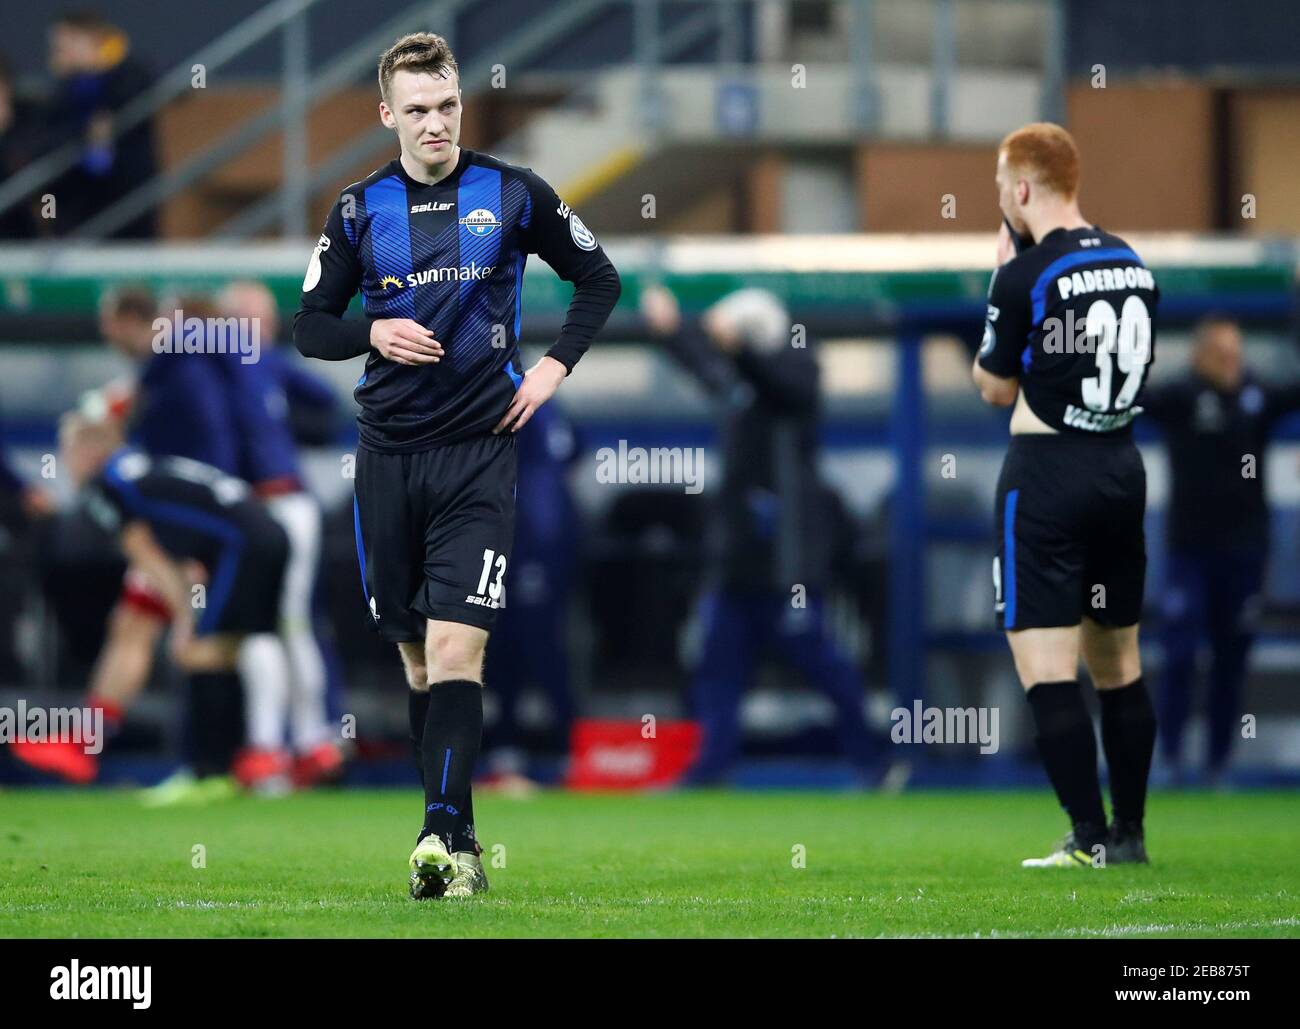 Soccer Football - DFB Cup - SC Paderborn 07 v Hamburger SV - Benteler-Arena, Paderborn, Germany - April 2, 2019  SC Paderborn's Sebastian Schonlau looks dejected after the match          REUTERS/Wolfgang Rattay  DFB regulations prohibit any use of photographs as image sequences and/or quasi-video Stock Photo